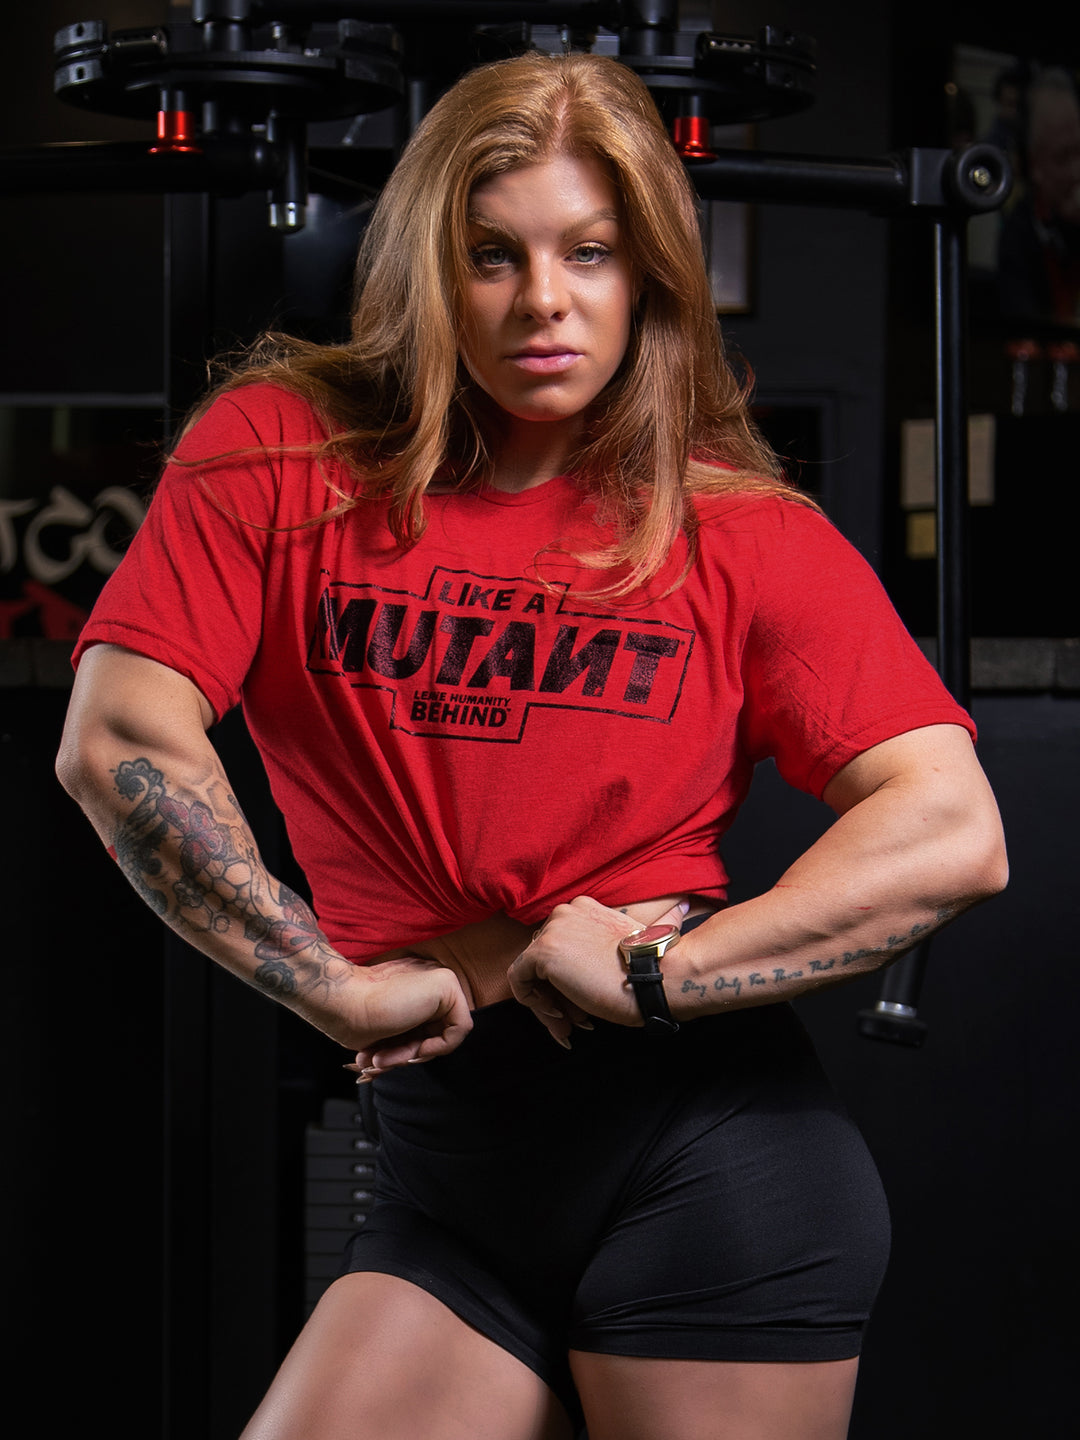 Shelby Guillaume posing at the gym while wearing the red 'MUTANT's Truck Month' t-shirt that features the 'Like a Mutant' phrase and 'Leave Humanity Behind' tagline in black.